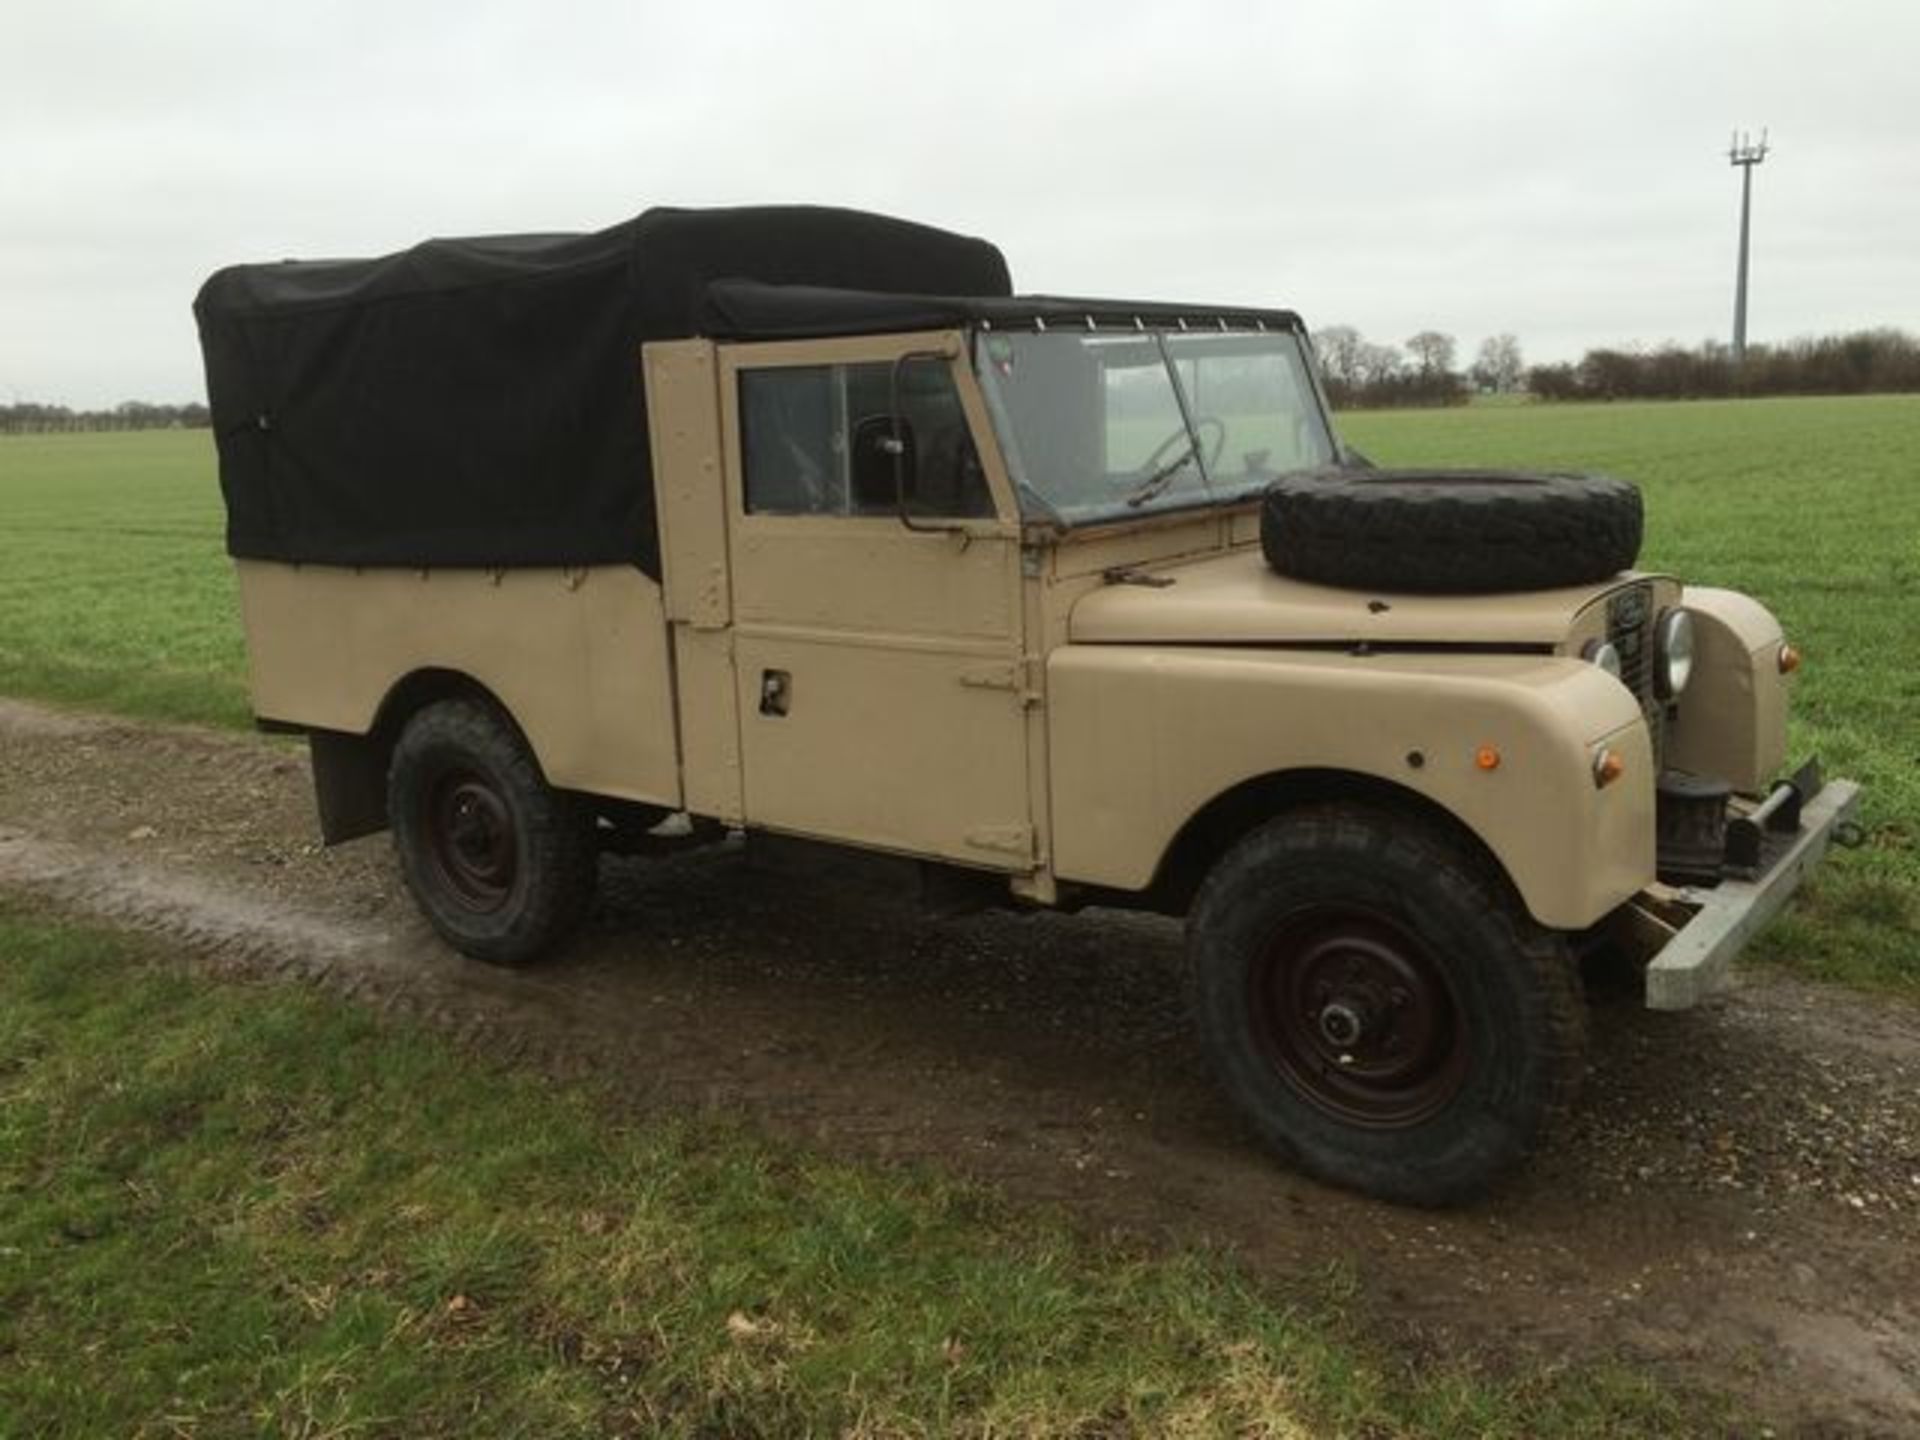 LAND ROVER Chassis number 57230302 - this 1955 Series 1 Pick Up is a 107" petrol example in LHD